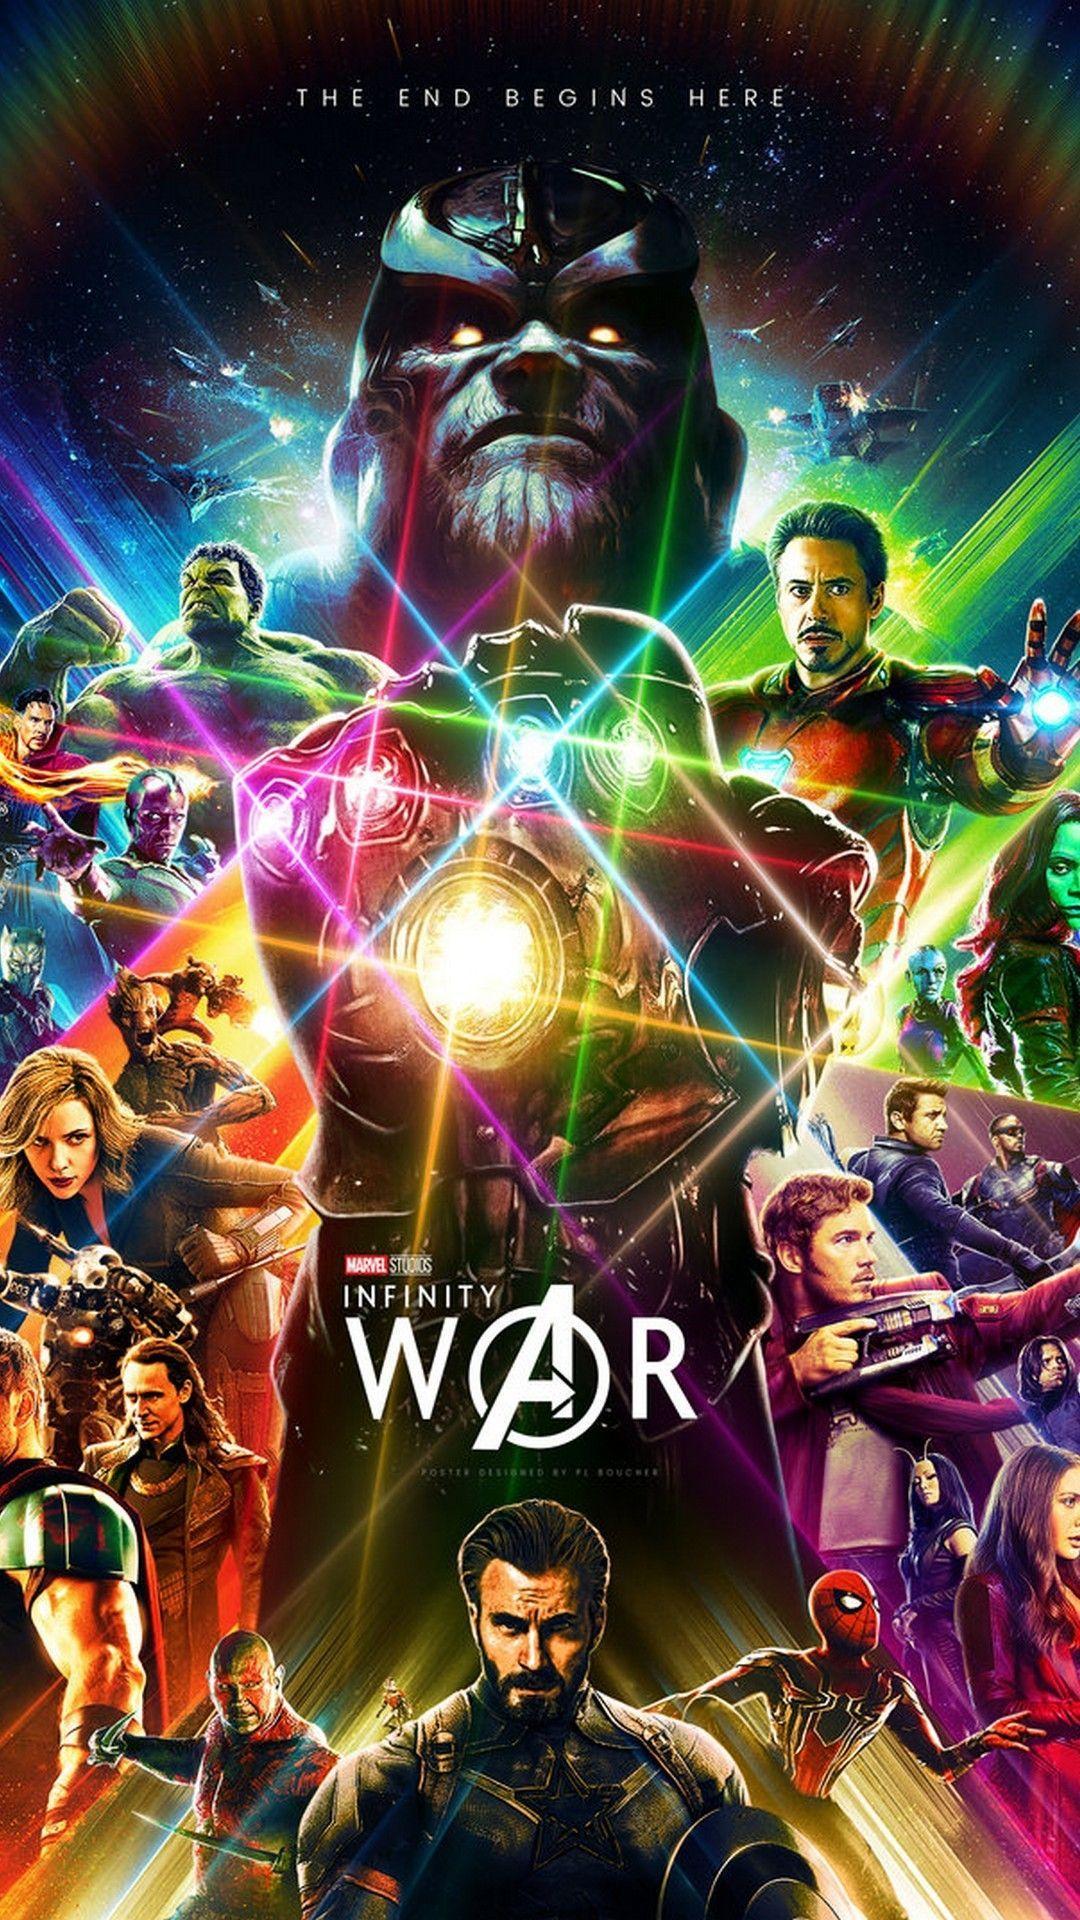 Avengers Infinity War Wallpaper Android. Marvel posters, Marvel